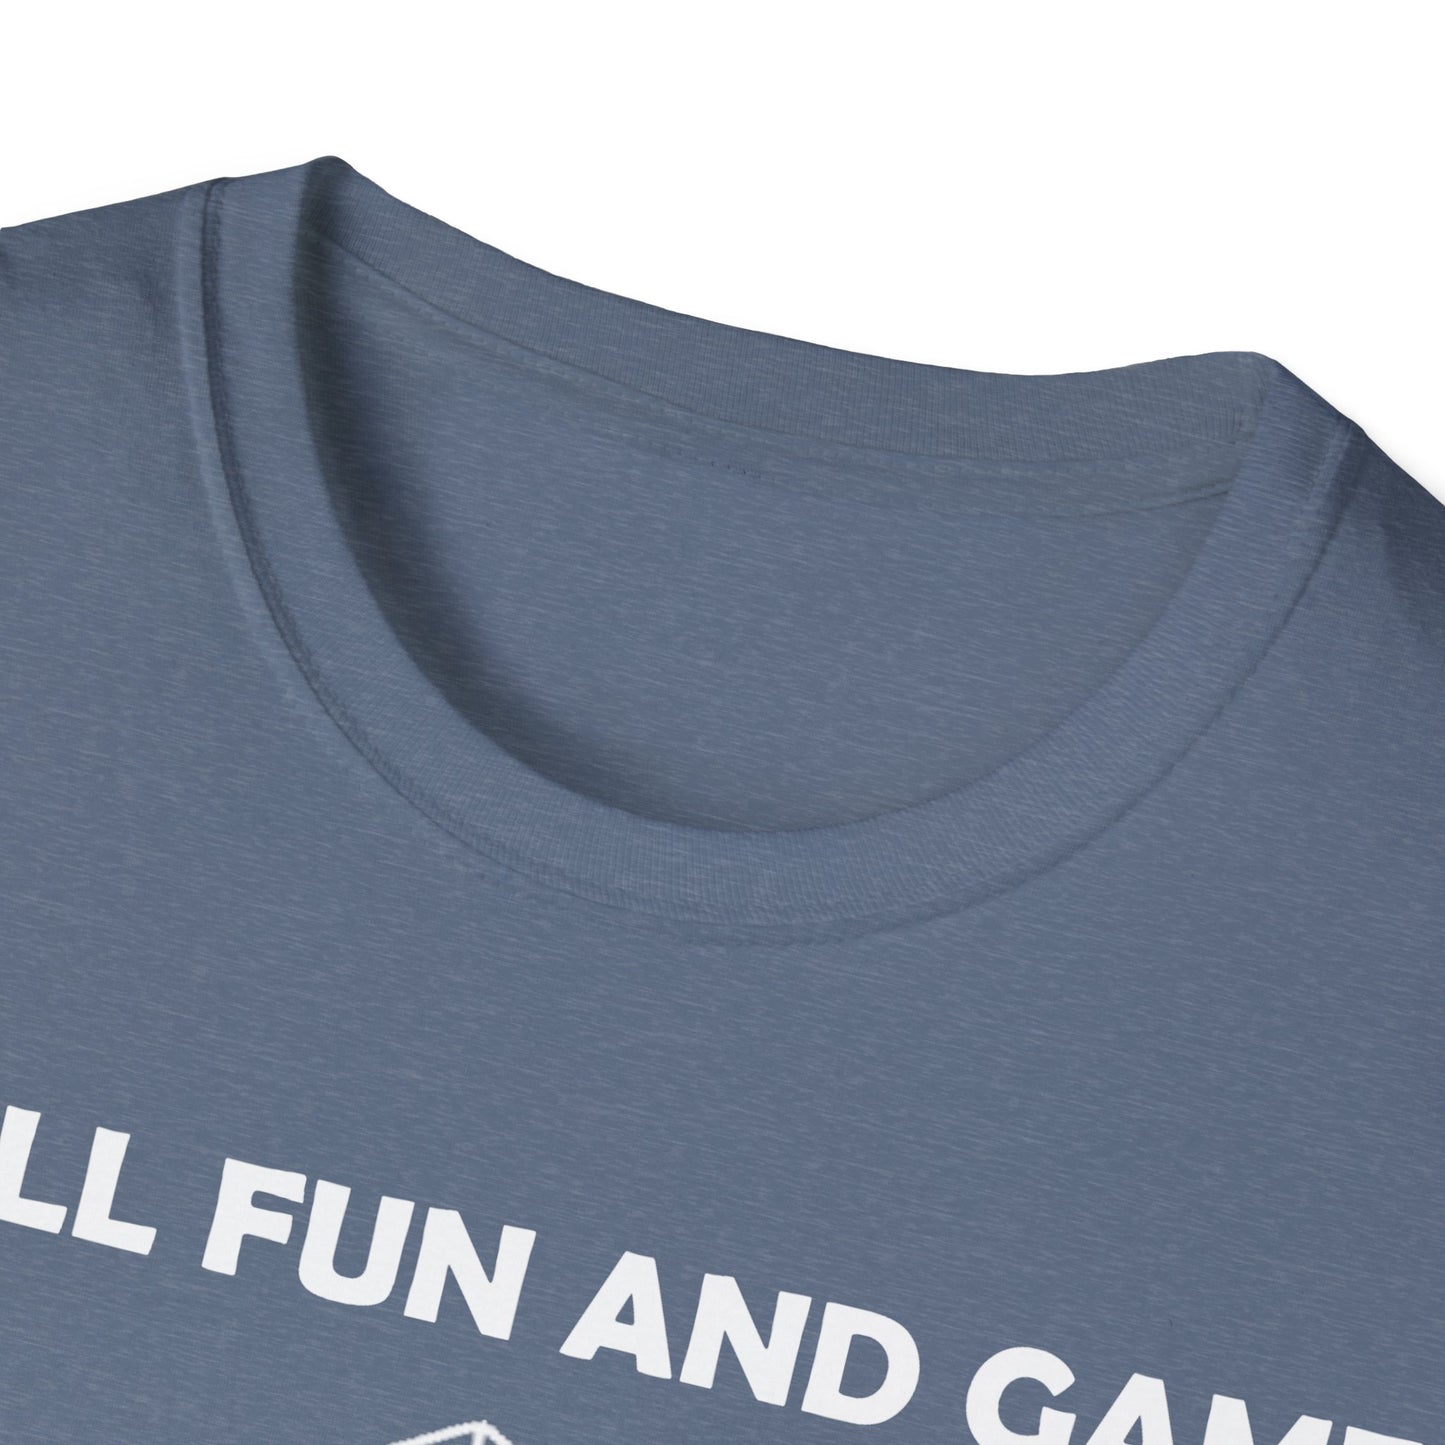 All fun and games - White - Unisex Softstyle T-Shirt